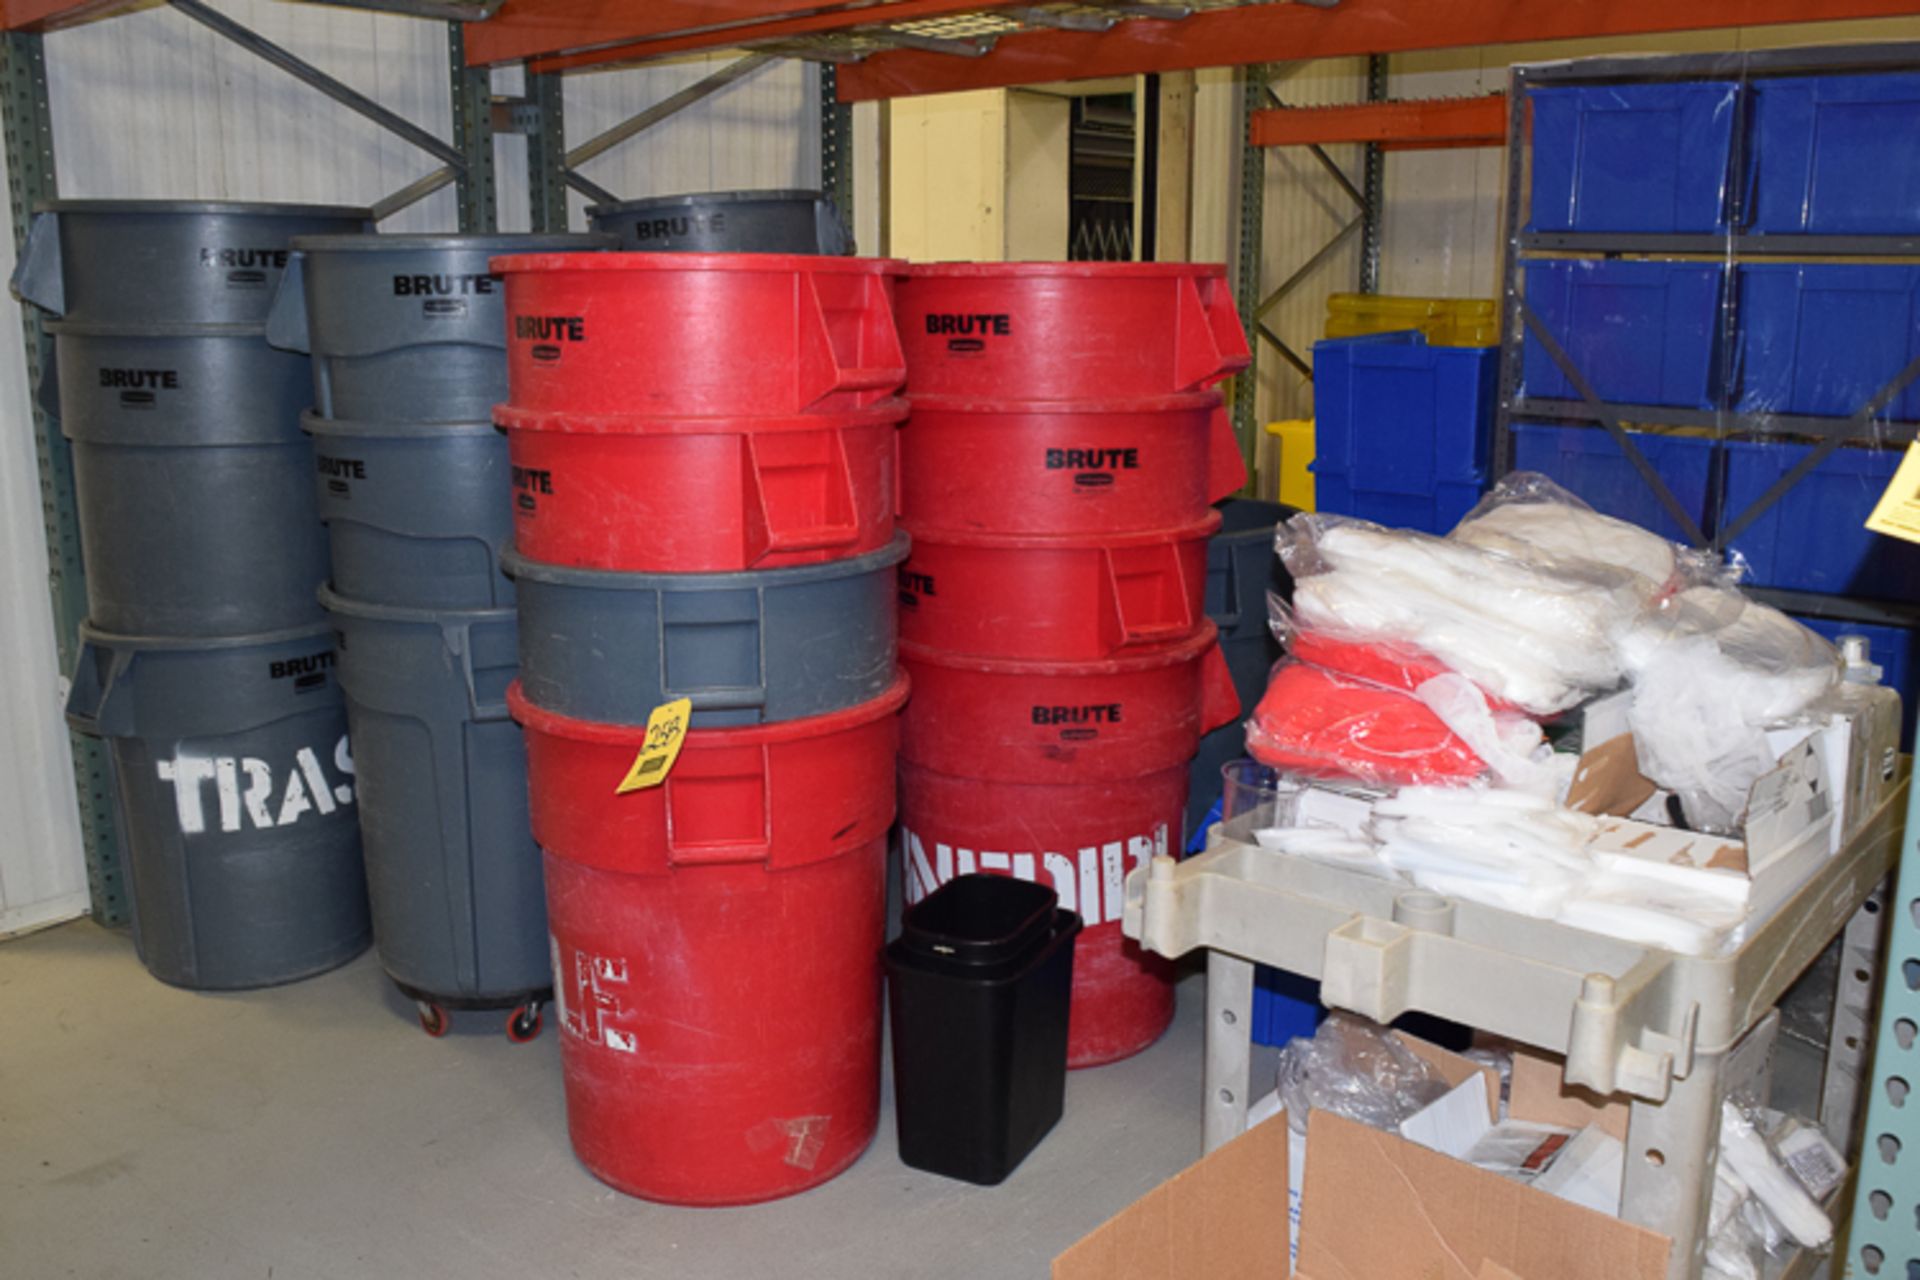 Rubbermaid Brute Trash Cans and Plastic Bins, Rigging Fee: Please Contact US Rigging 920-655-2767